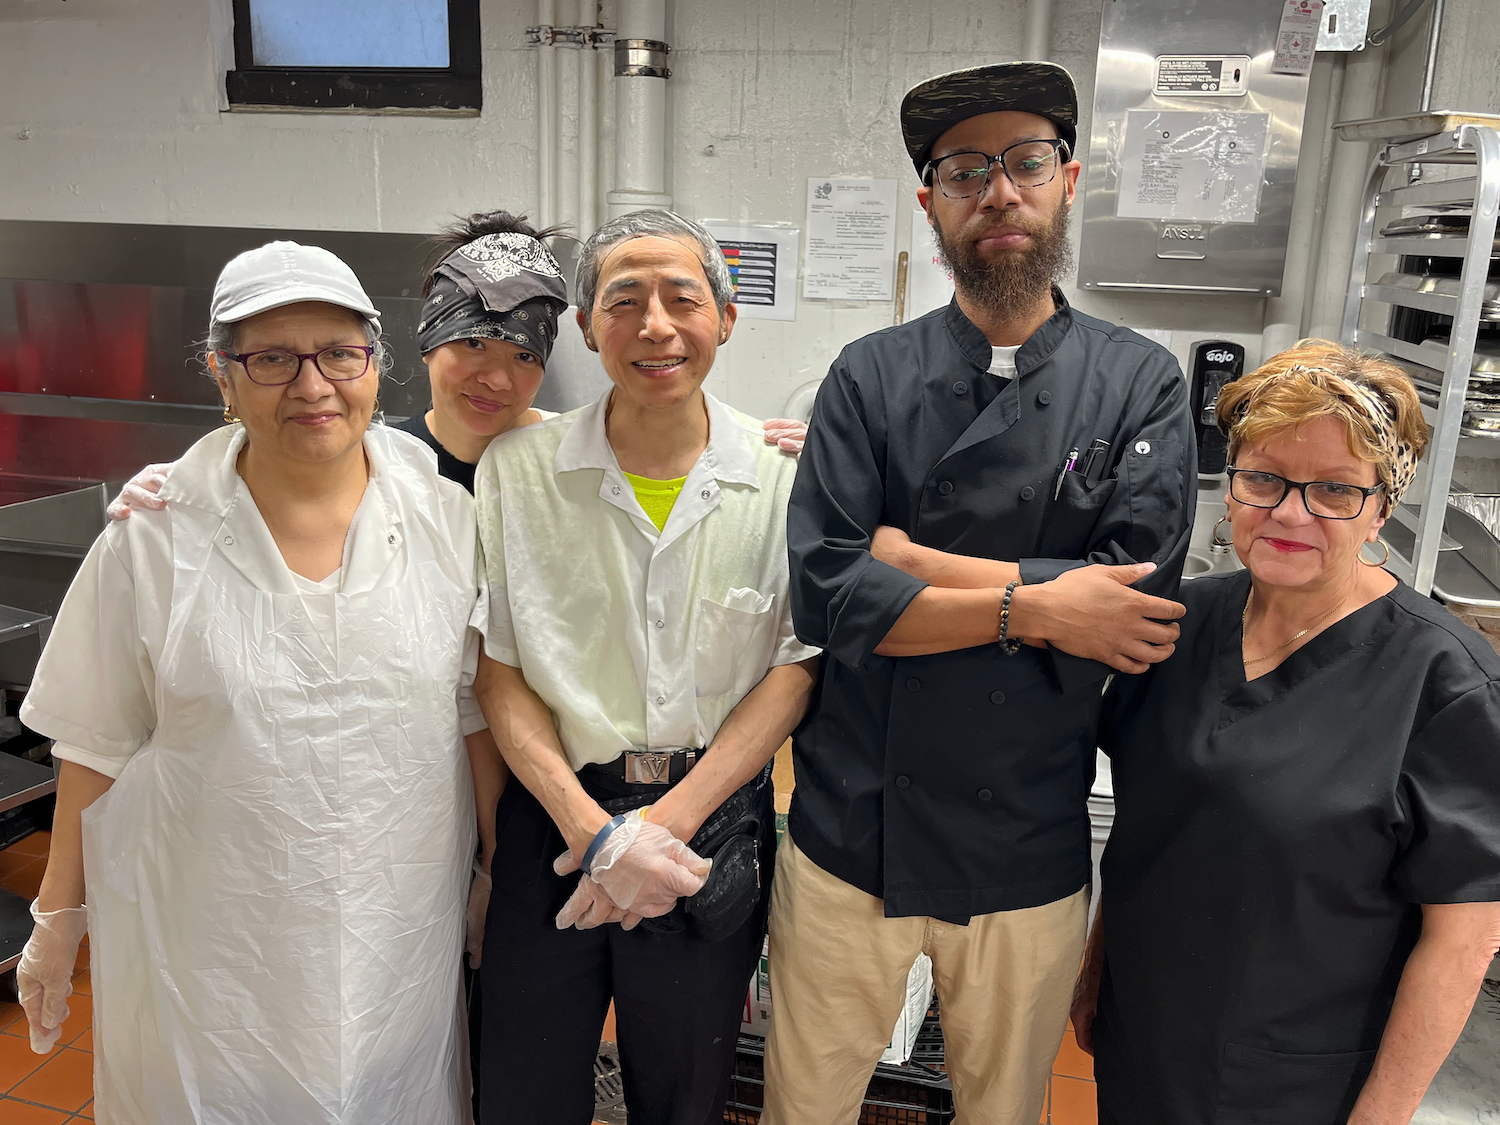 The Older Adult Center's five-person kitchen team.